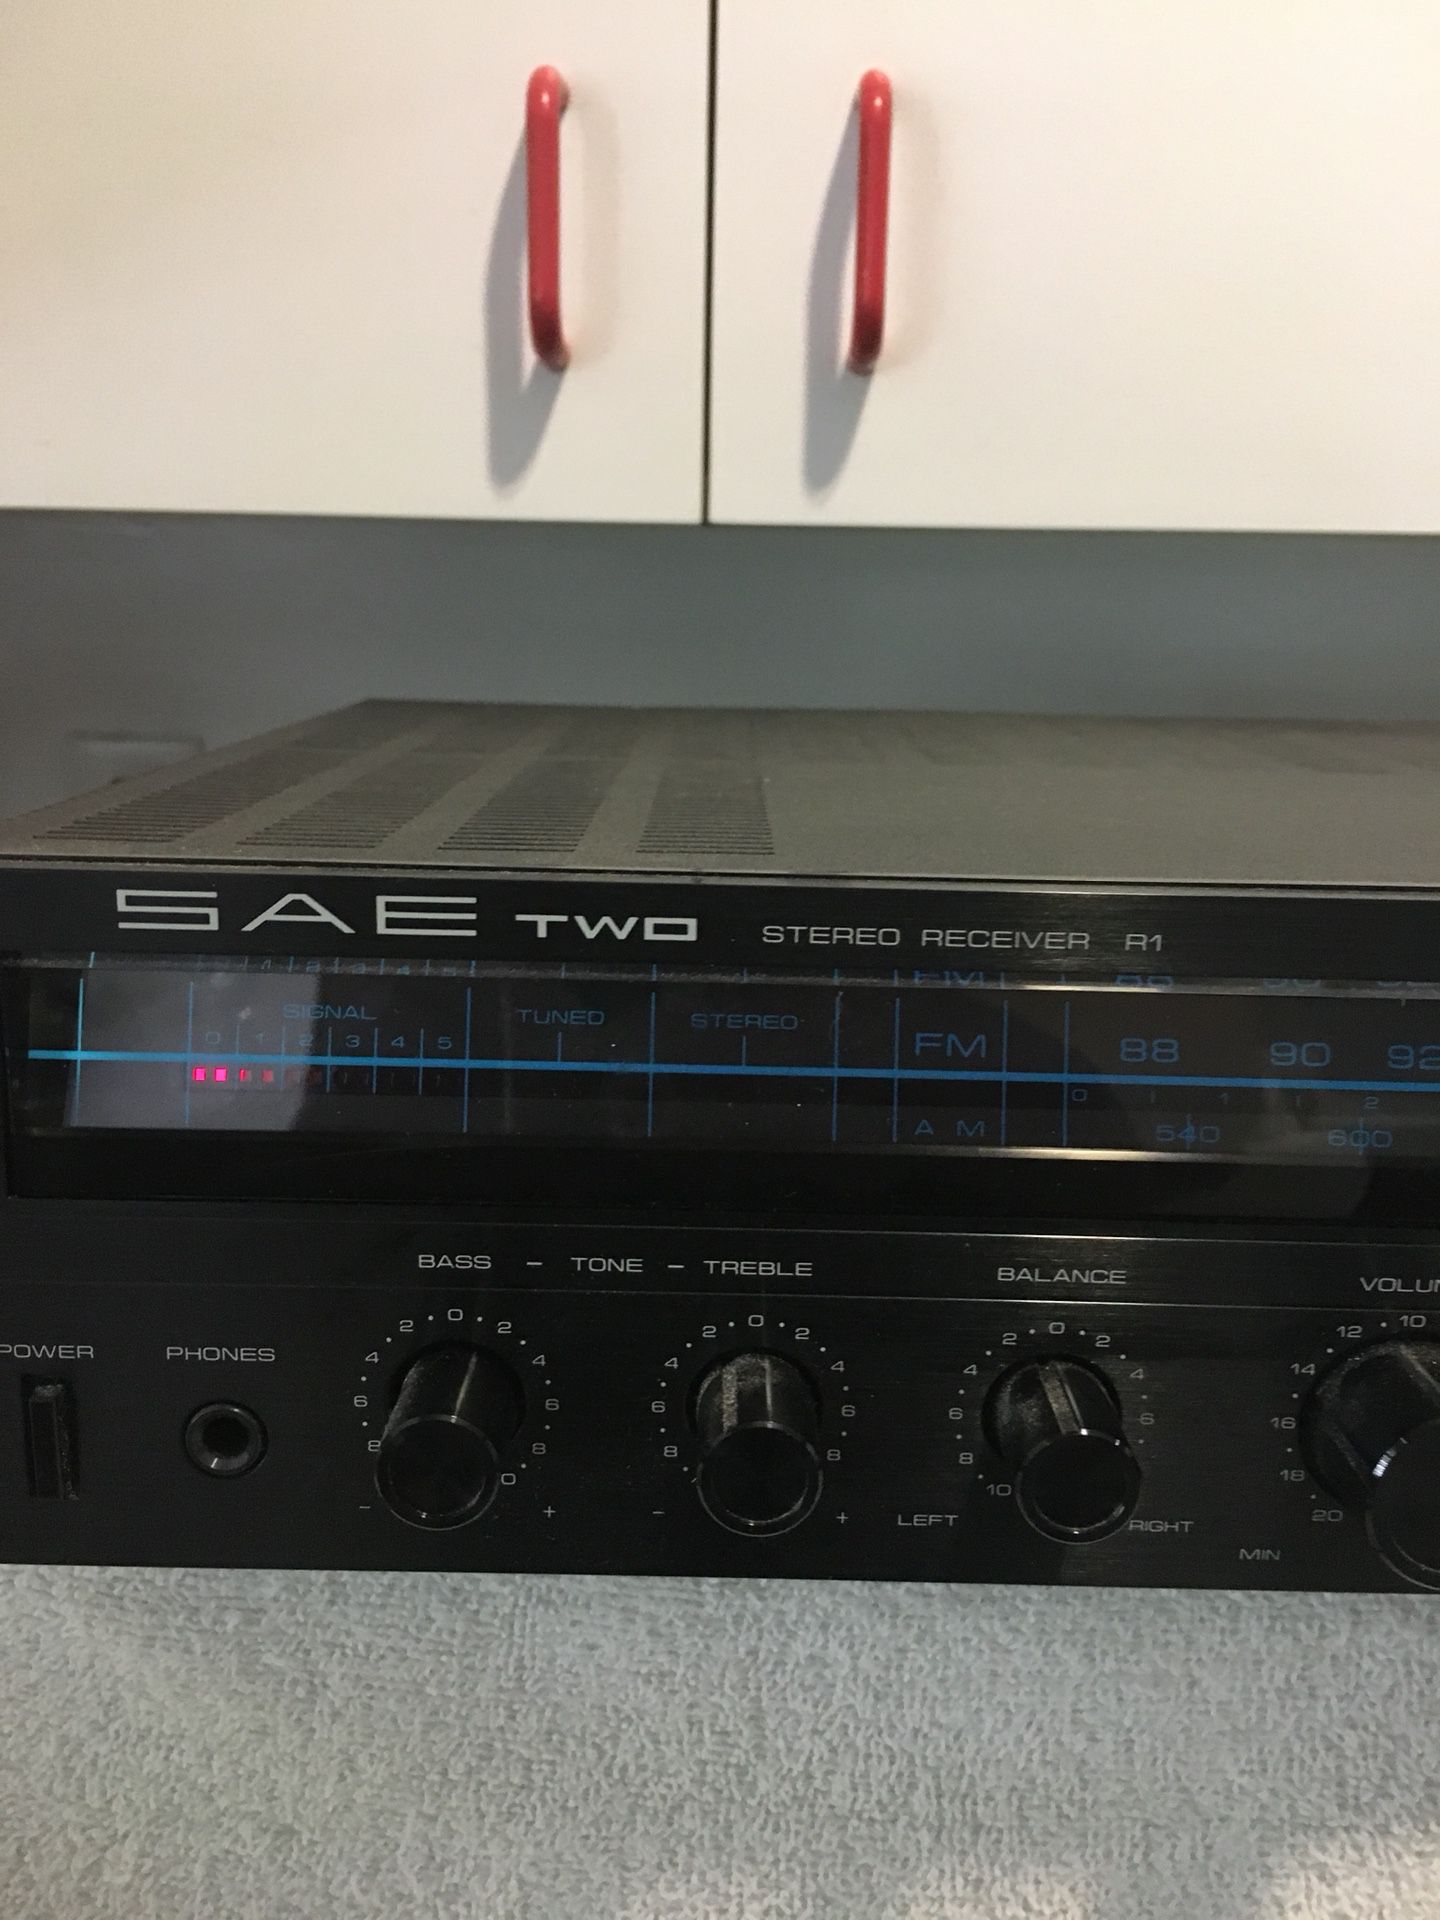 SAE two stereo receiver r1